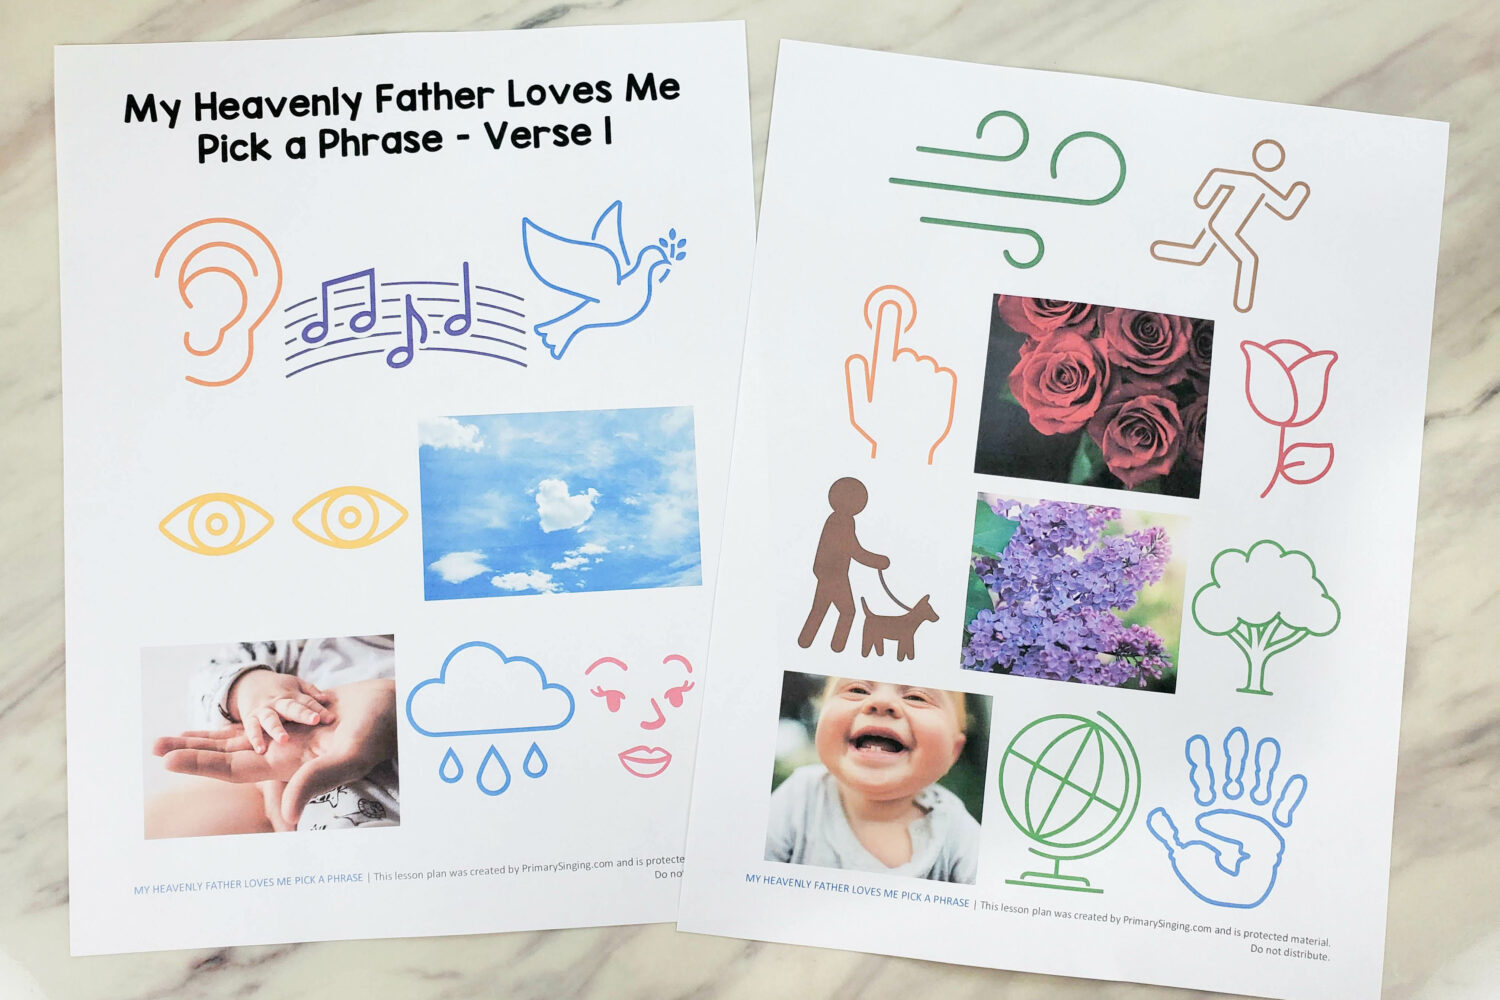 My Heavenly Father Loves Me - Primary Singing Time Game - Pick a Picture Phrase. Use these keyword pictures that represent a line of the song to help teach the lyrics. With printable song helps for LDS Primary music leaders.